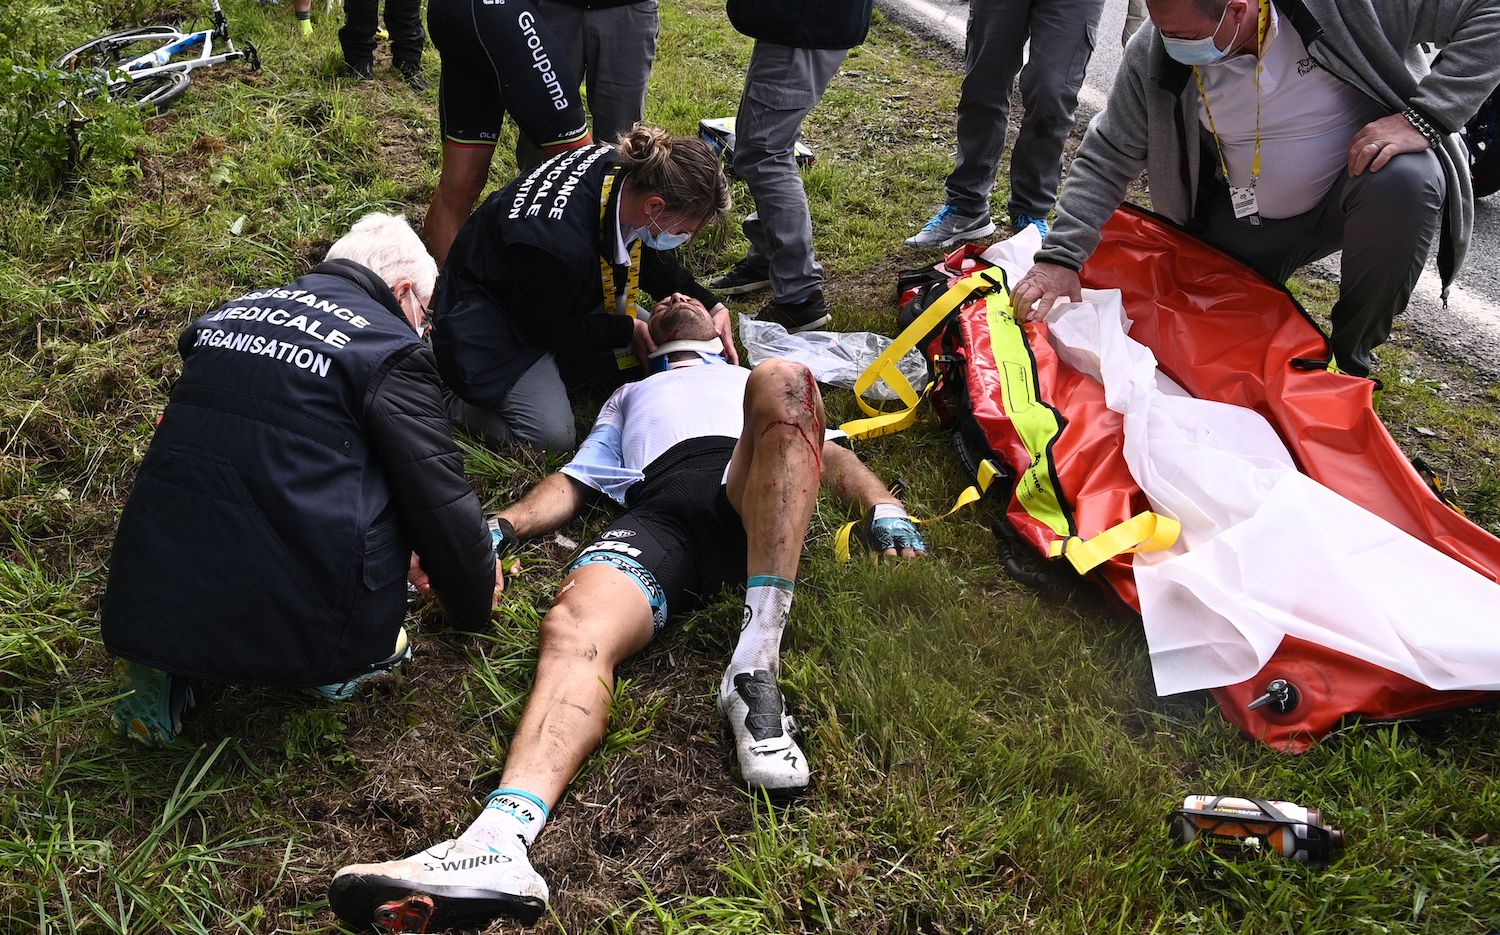 Team B&B KTM's Cyril Lemoine of France is helped by medical staff members after crashing during the 1st stage of the 108th edition of the Tour de France cycling race, 197 km between Brest and Landerneau, on June 26, 2021. (Photo by Anne-Christine POUJOULAT / POOL / AFP) (Photo by ANNE-CHRISTINE POUJOULAT/POOL/AFP via Getty Images)